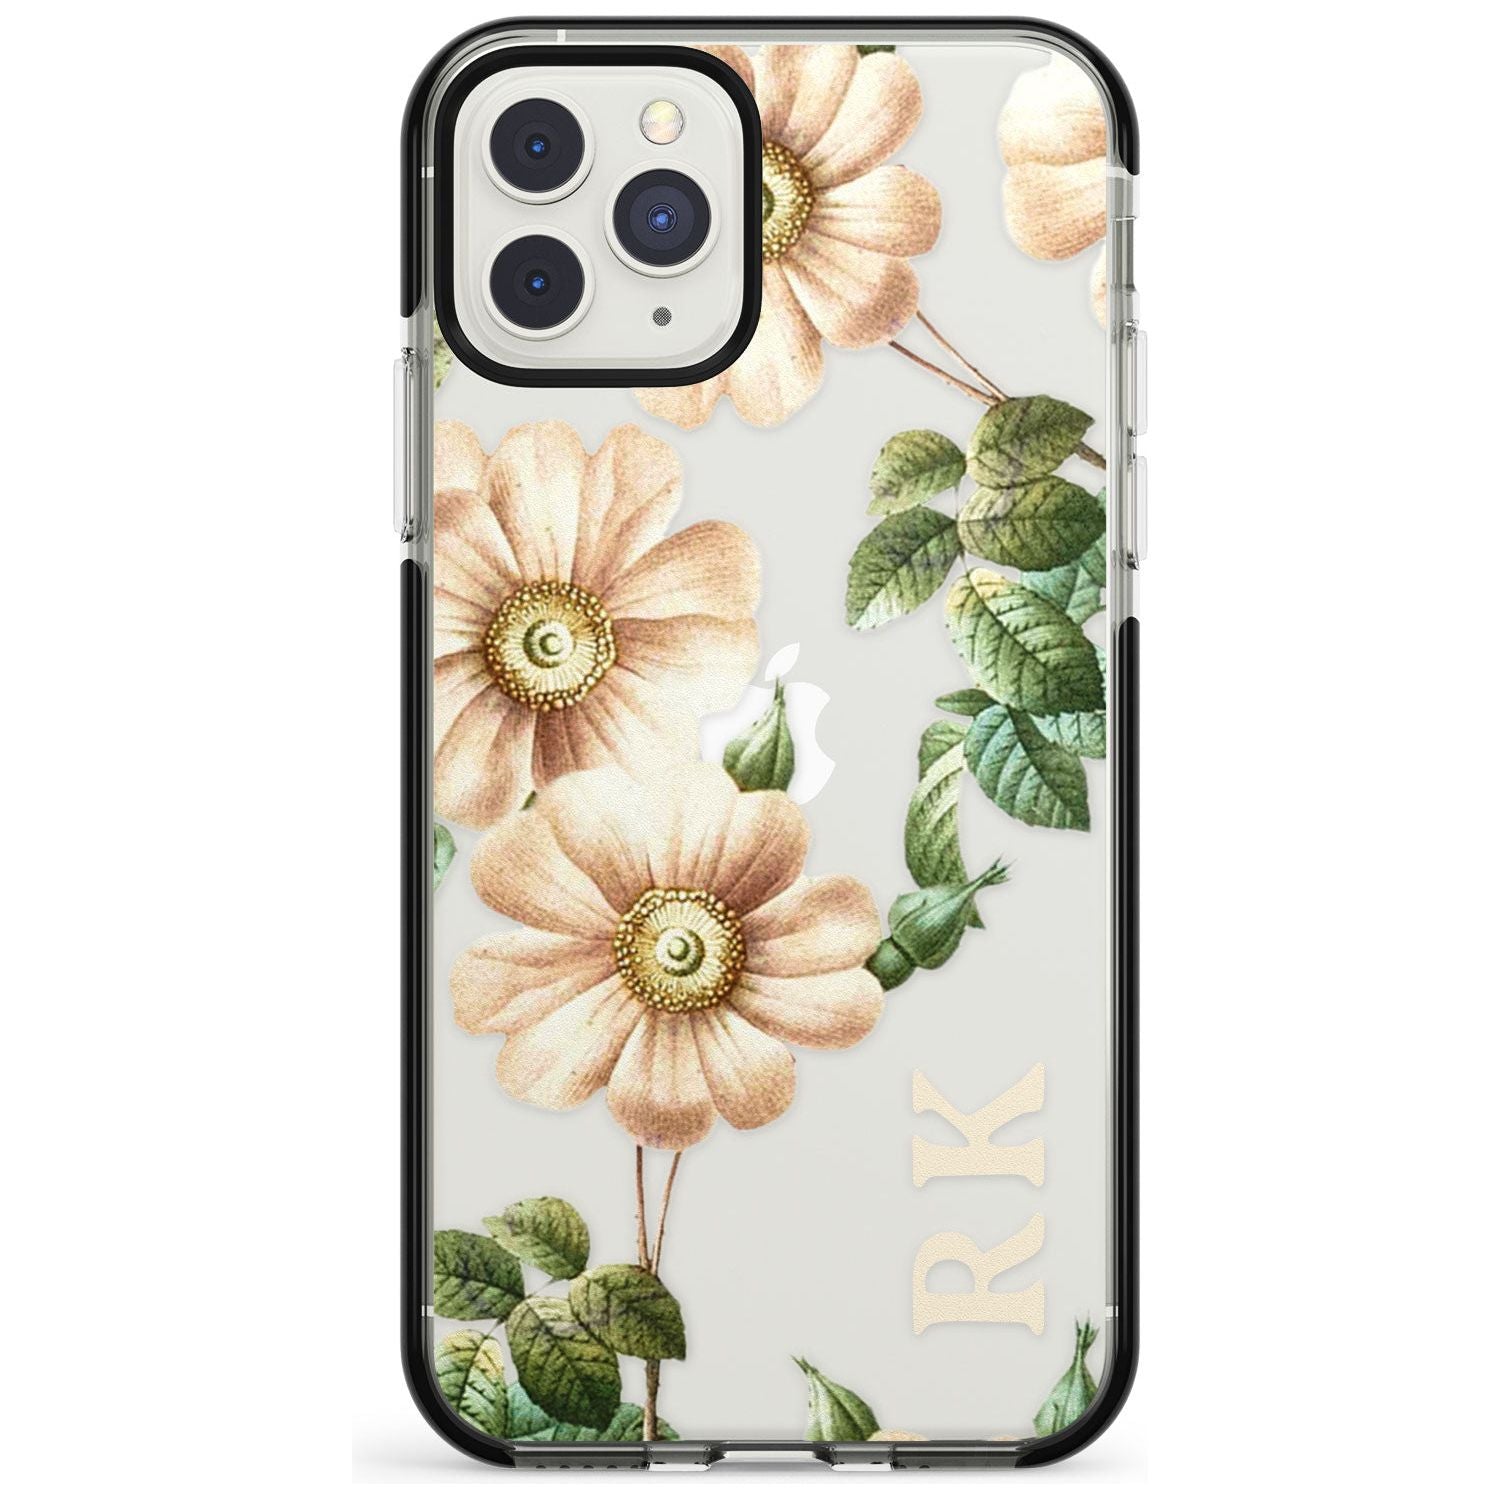 Custom Clear Vintage Floral Cream Anemones Black Impact Phone Case for iPhone 11 Pro Max